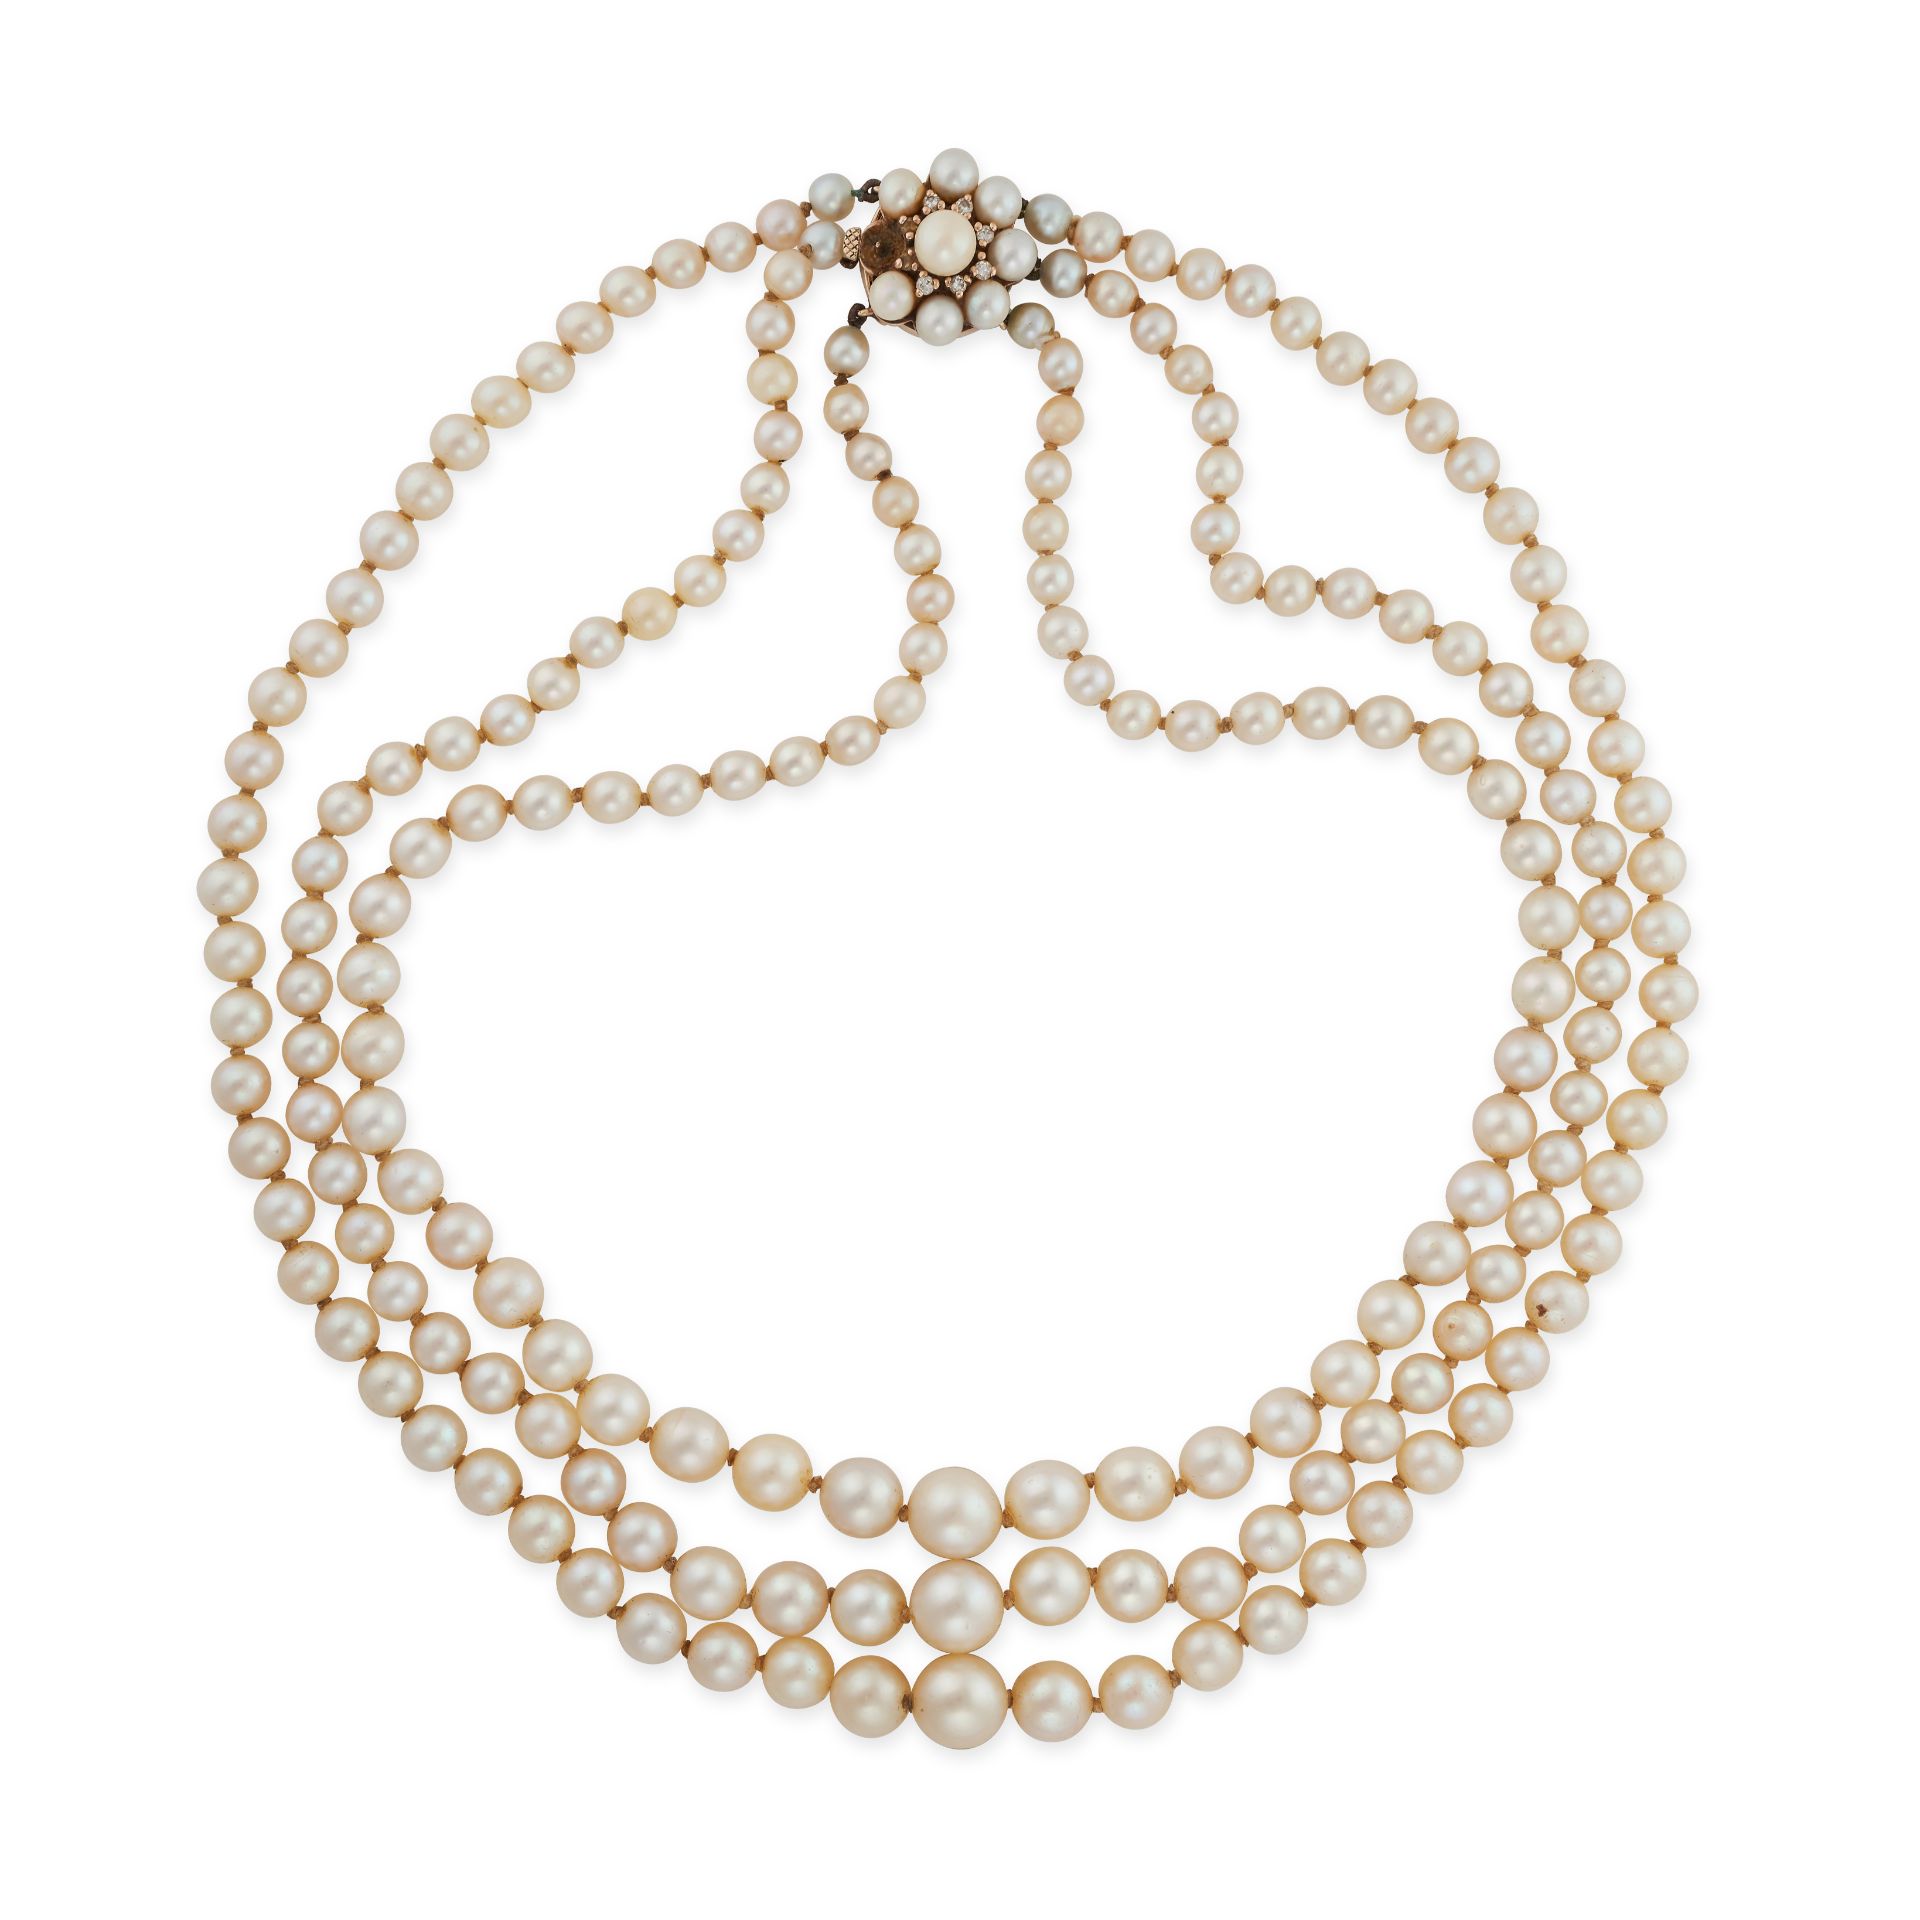 NO RESERVE PEARL NECKLACE in yellow gold, comprising three rows of pearls, the clasp set with a c...